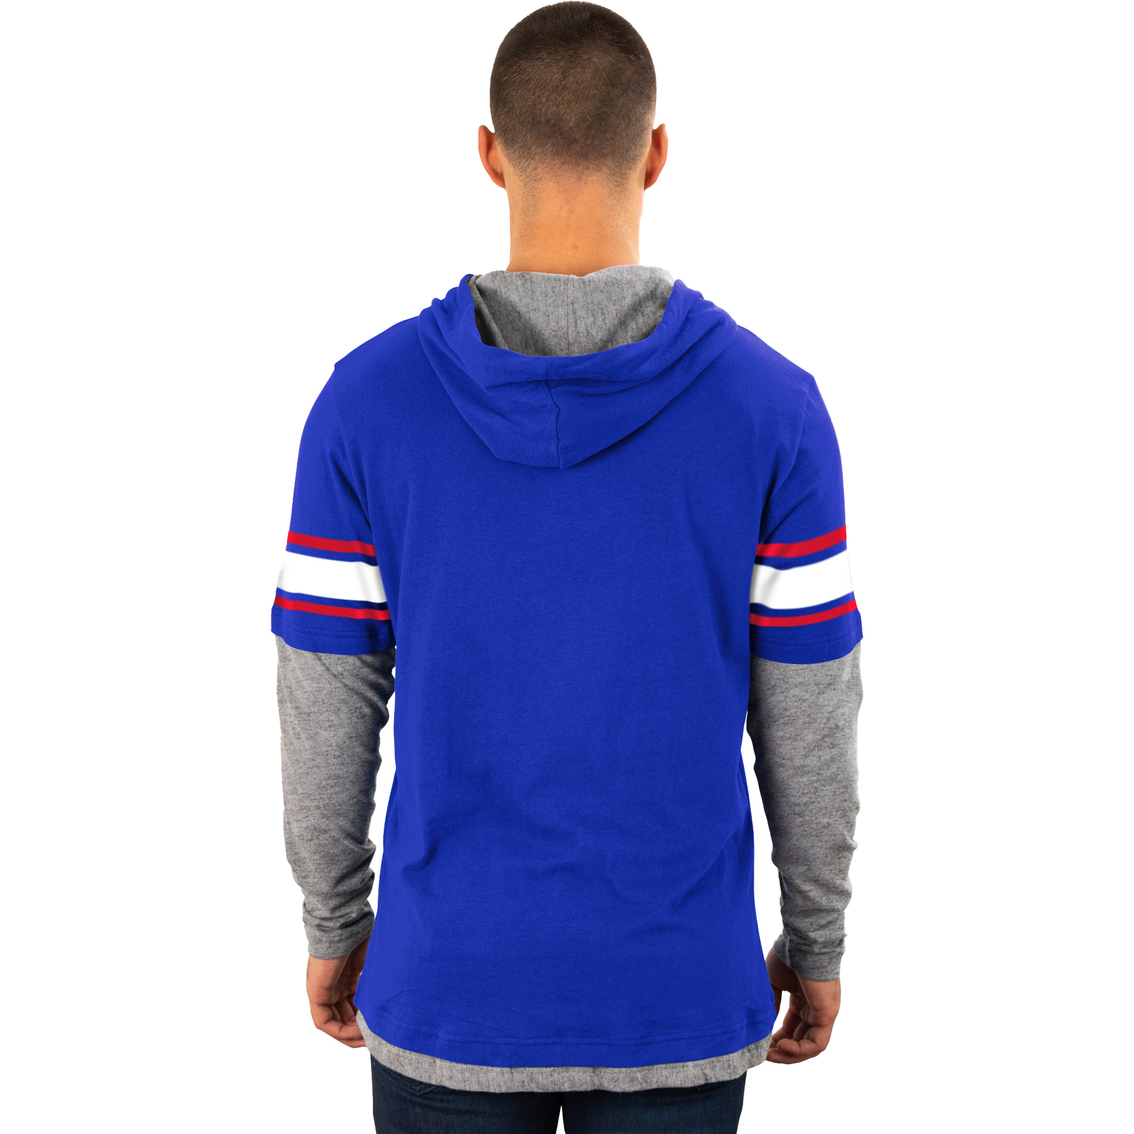 New Era Cap Co. NFL Team Brushed Cotton Pullover Hoodie - Image 5 of 5